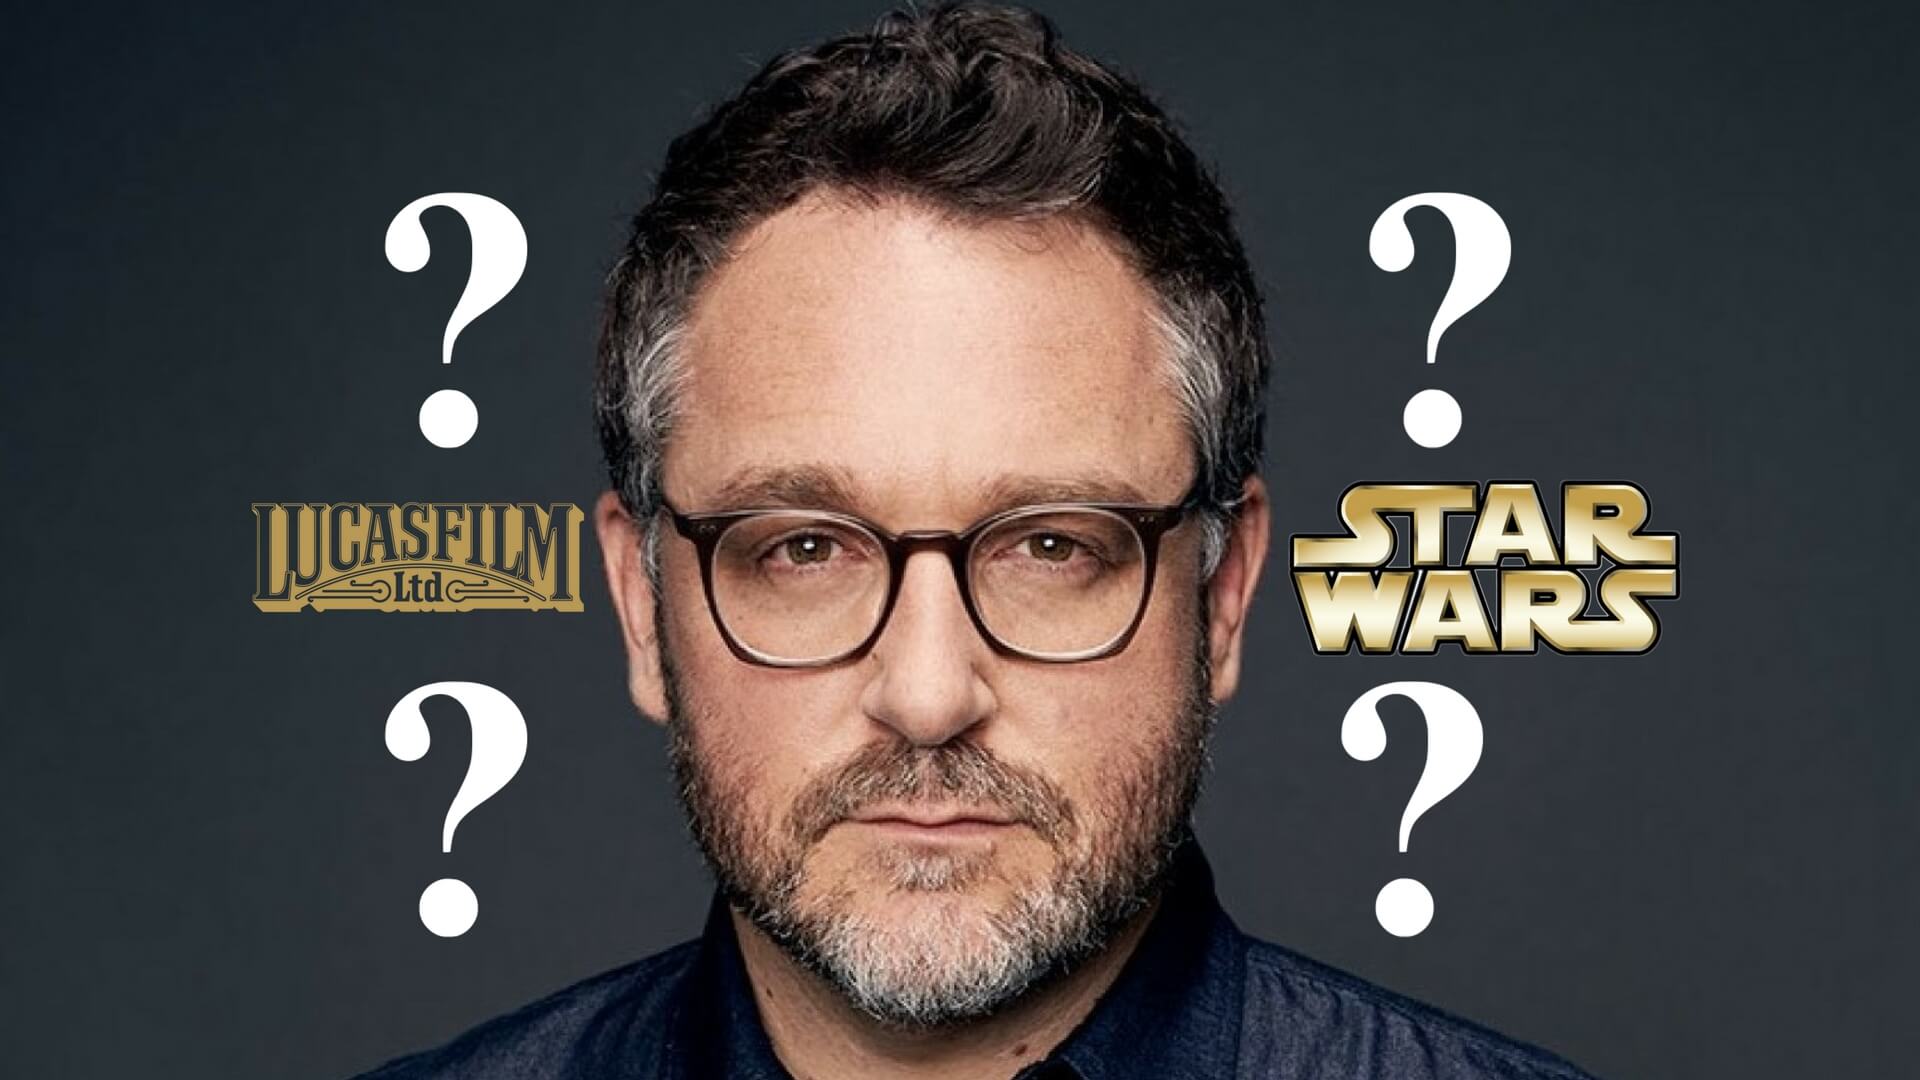 Star Wars Drama: What’s Going On at LucasFilm?